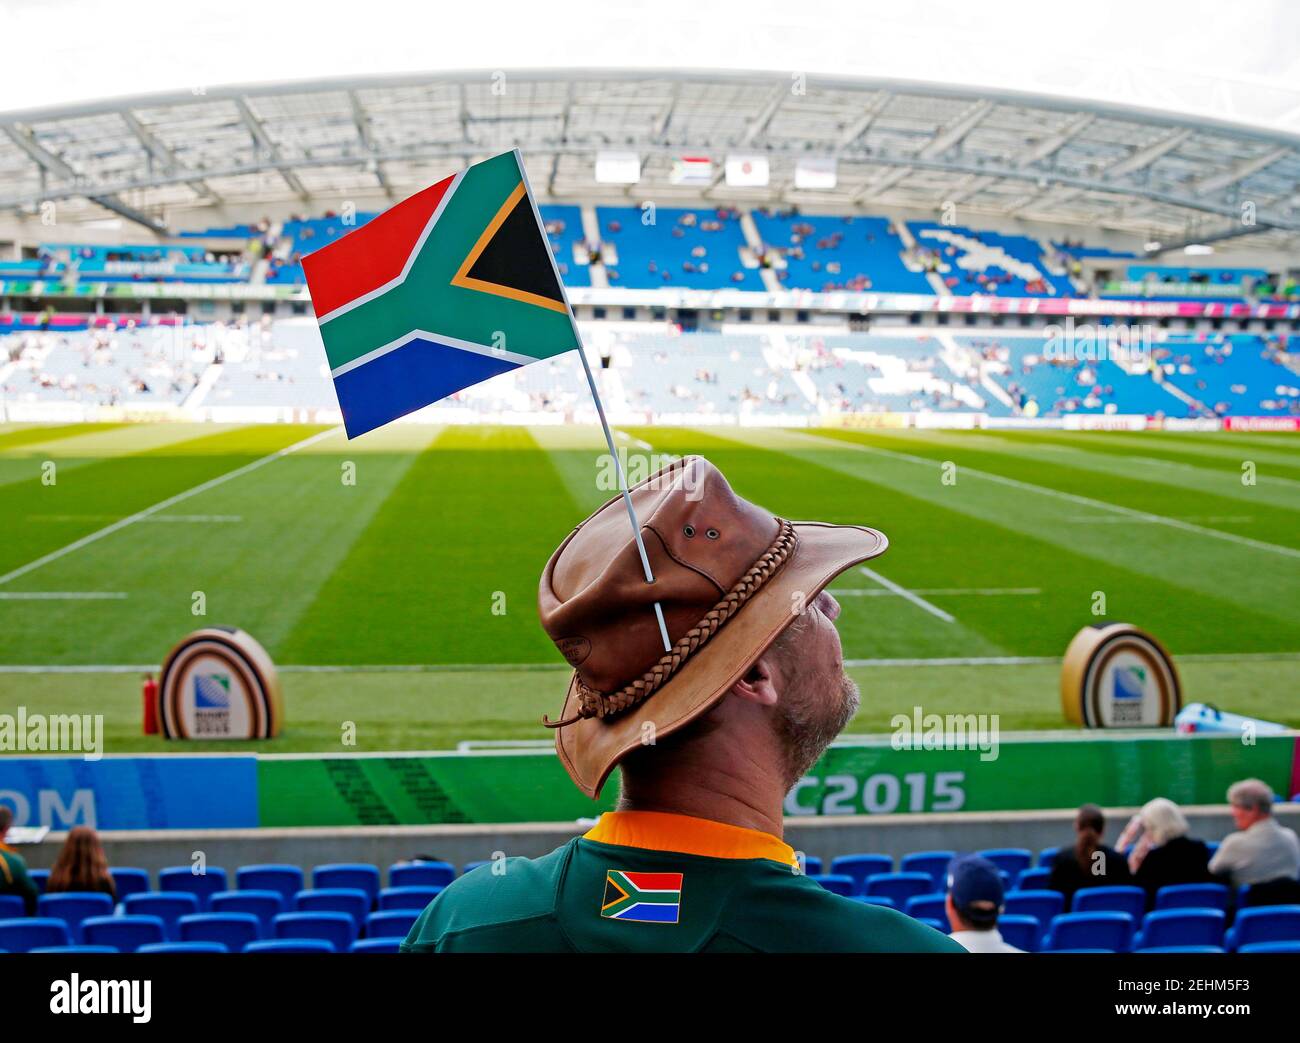 Rugby Union - South Africa v Japan - IRB Rugby World Cup 2015 Pool B - Brighton Community Stadium, Brighton, England - 19/9/15  A South Africa fan with a flag on his hat before the match  Reuters / Eddie Keogh  Livepic Stock Photo